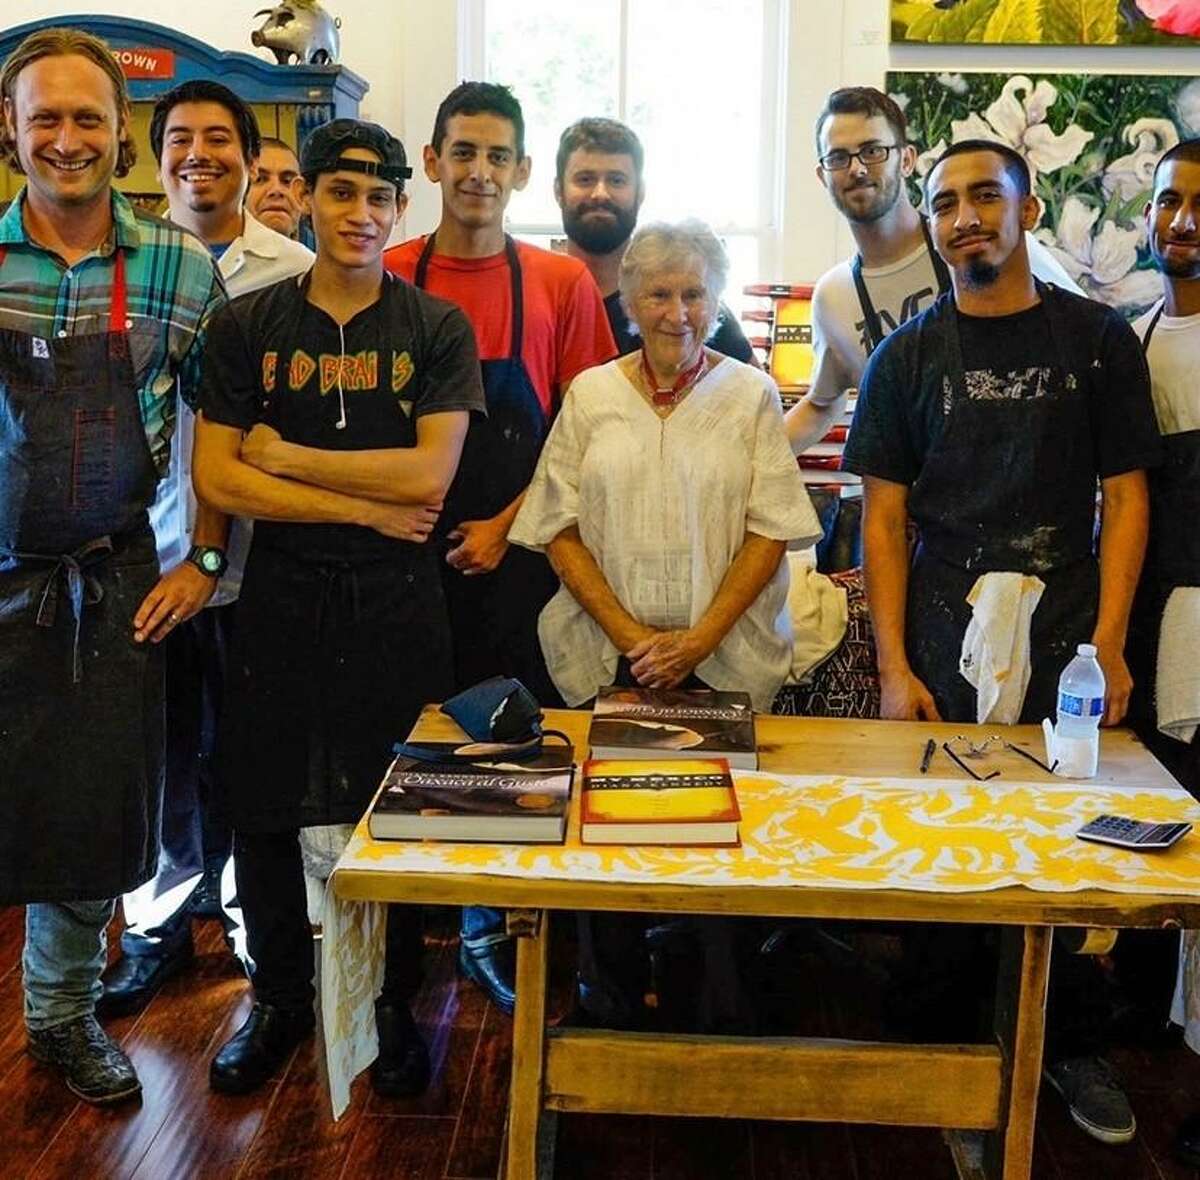 In 2014 San Antonio chef Stefan Bowers (left) and the kitchen staff of his restaurant Feast left a busy line to meet author Diana Kennedy (center, in white), who was signing books at a nearby store.